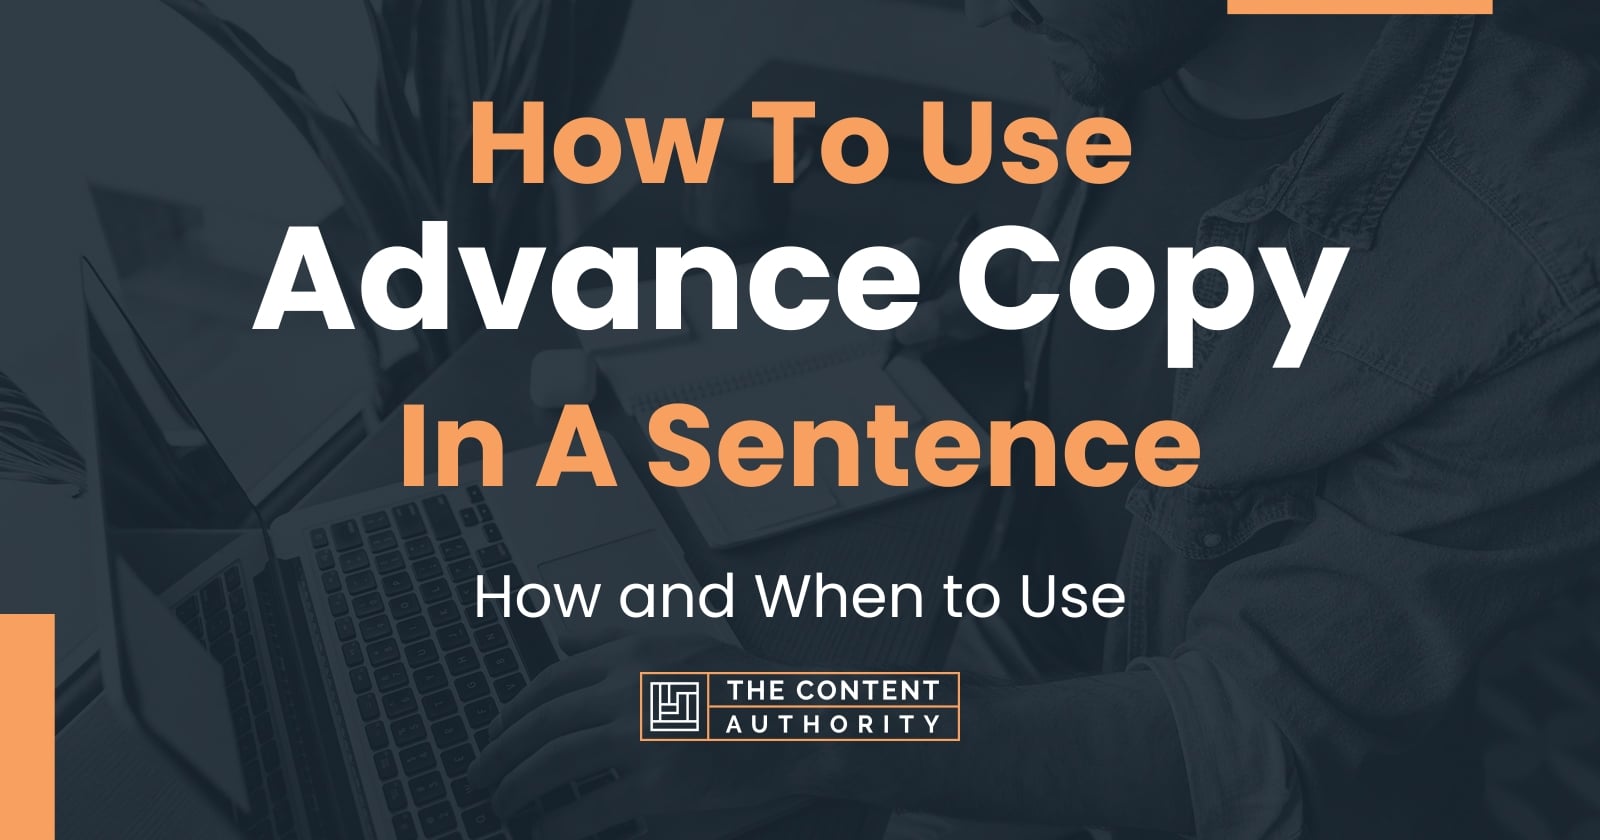 how-to-use-advance-copy-in-a-sentence-how-and-when-to-use